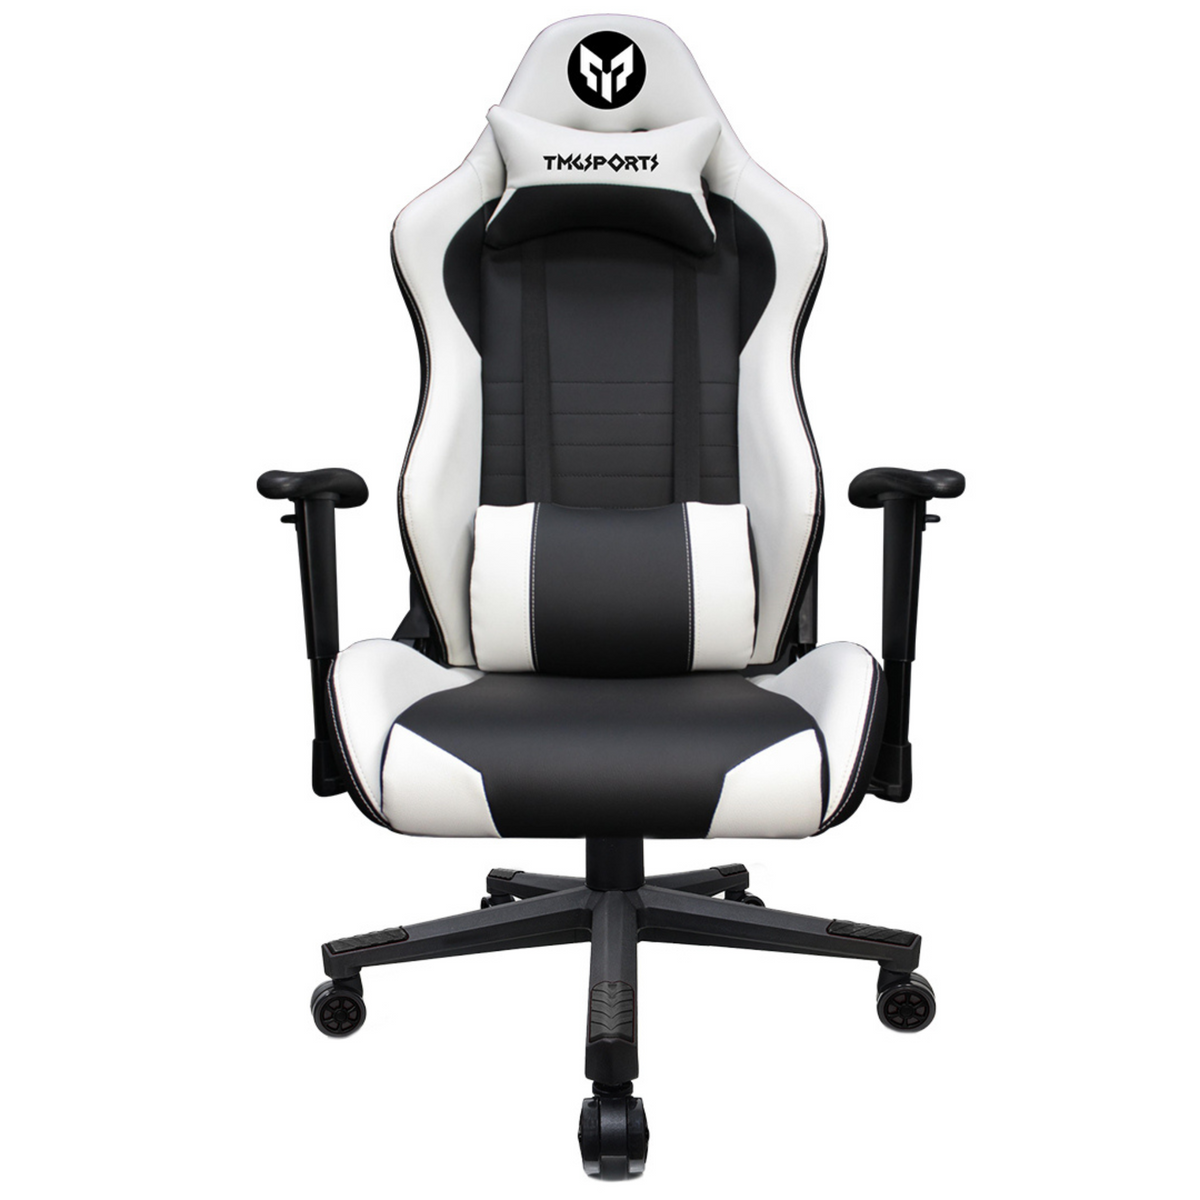 The Mysterious Gamer TMG Sports Gaming Chair (White)